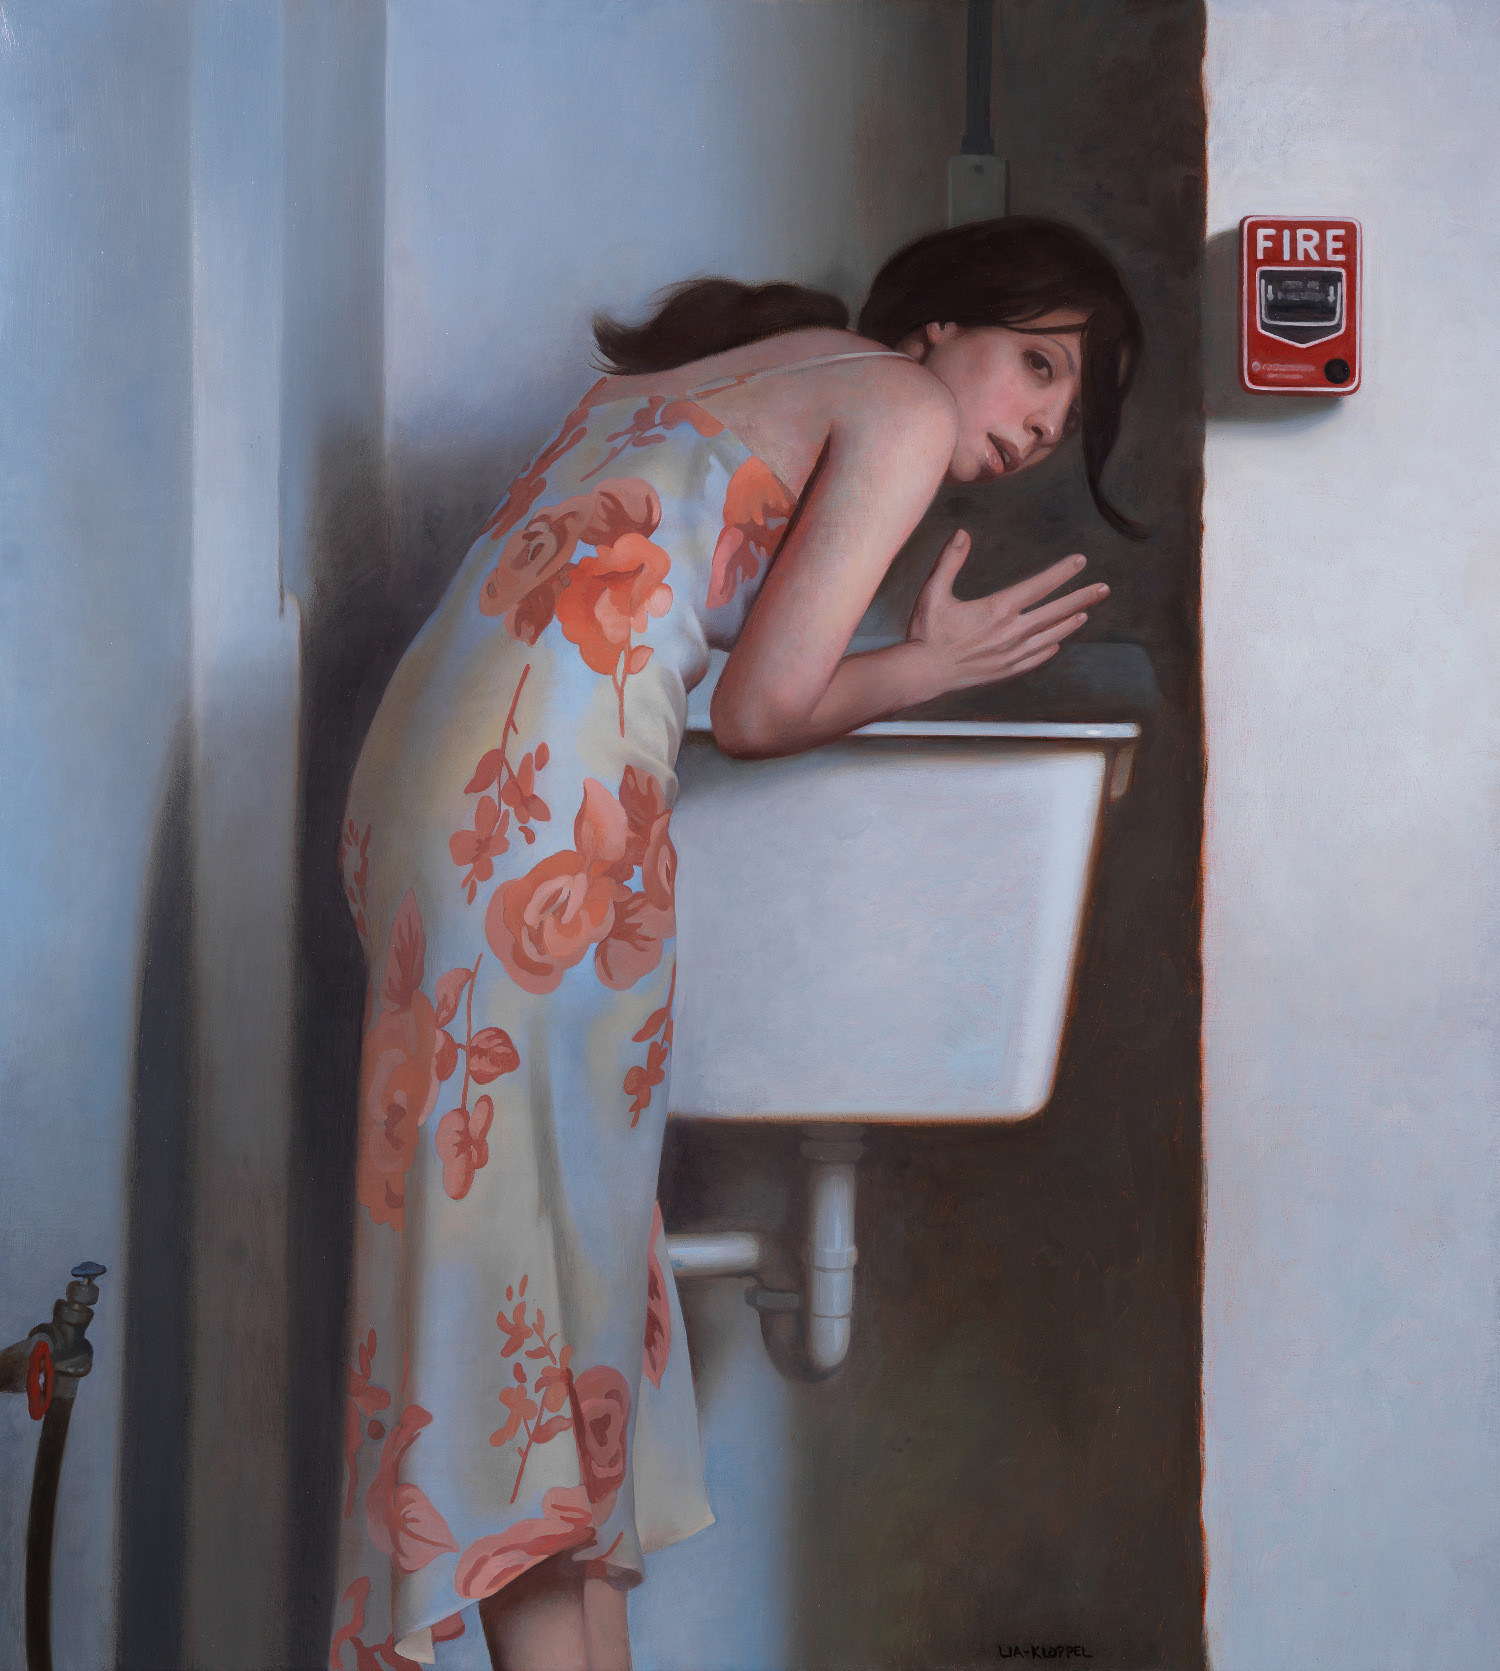   Quench , 2015, Oil on linen, 22 x 20 inches, Private collection 